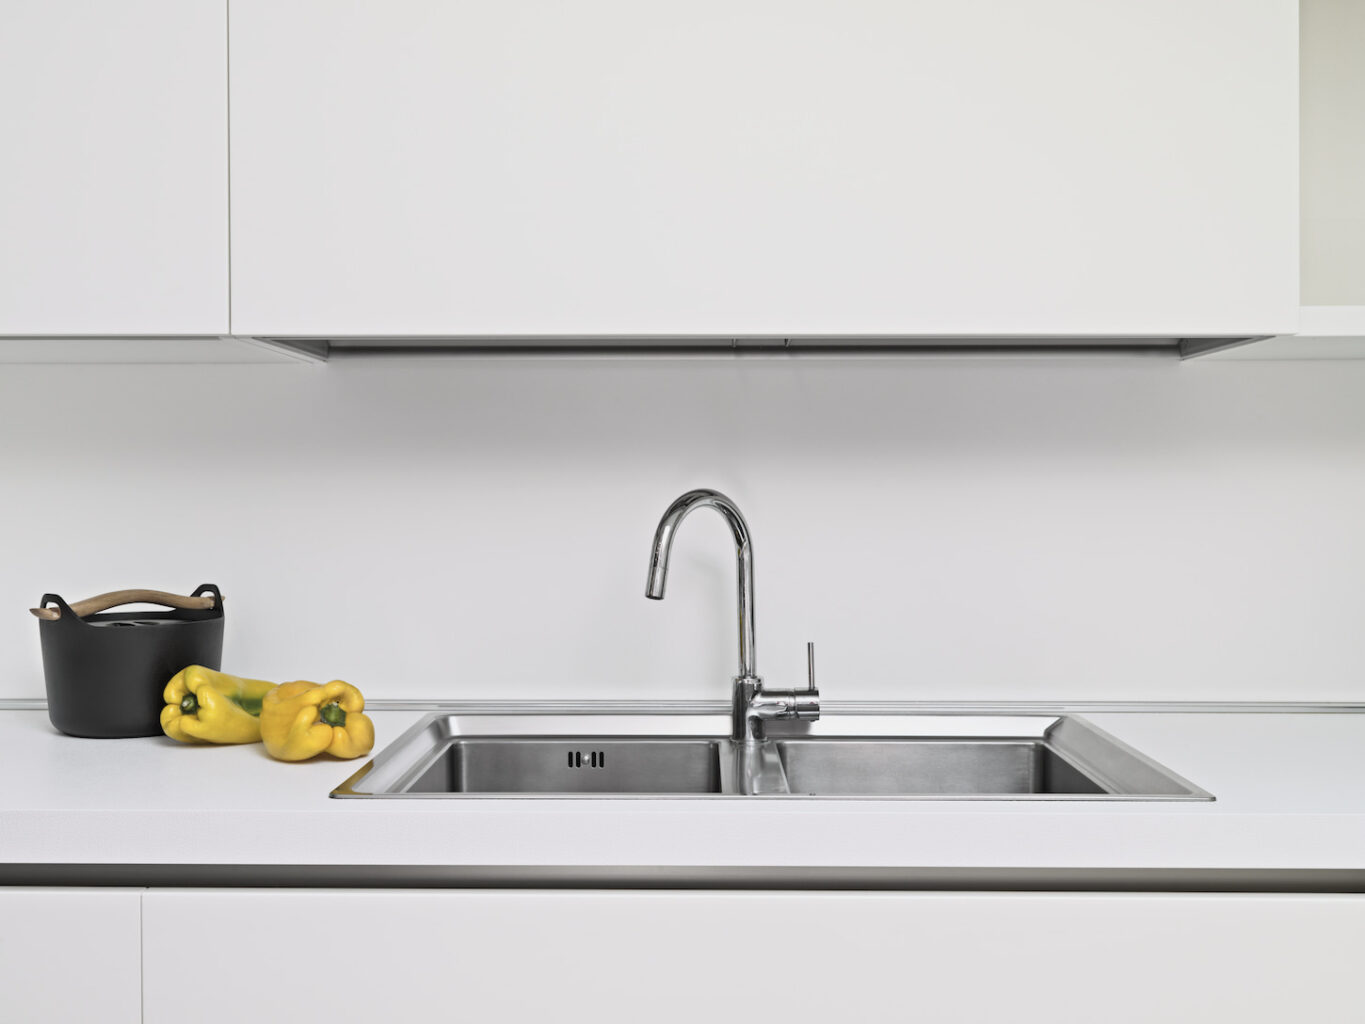 An image of a steel sink in a modern kitchen with objects near the sink.